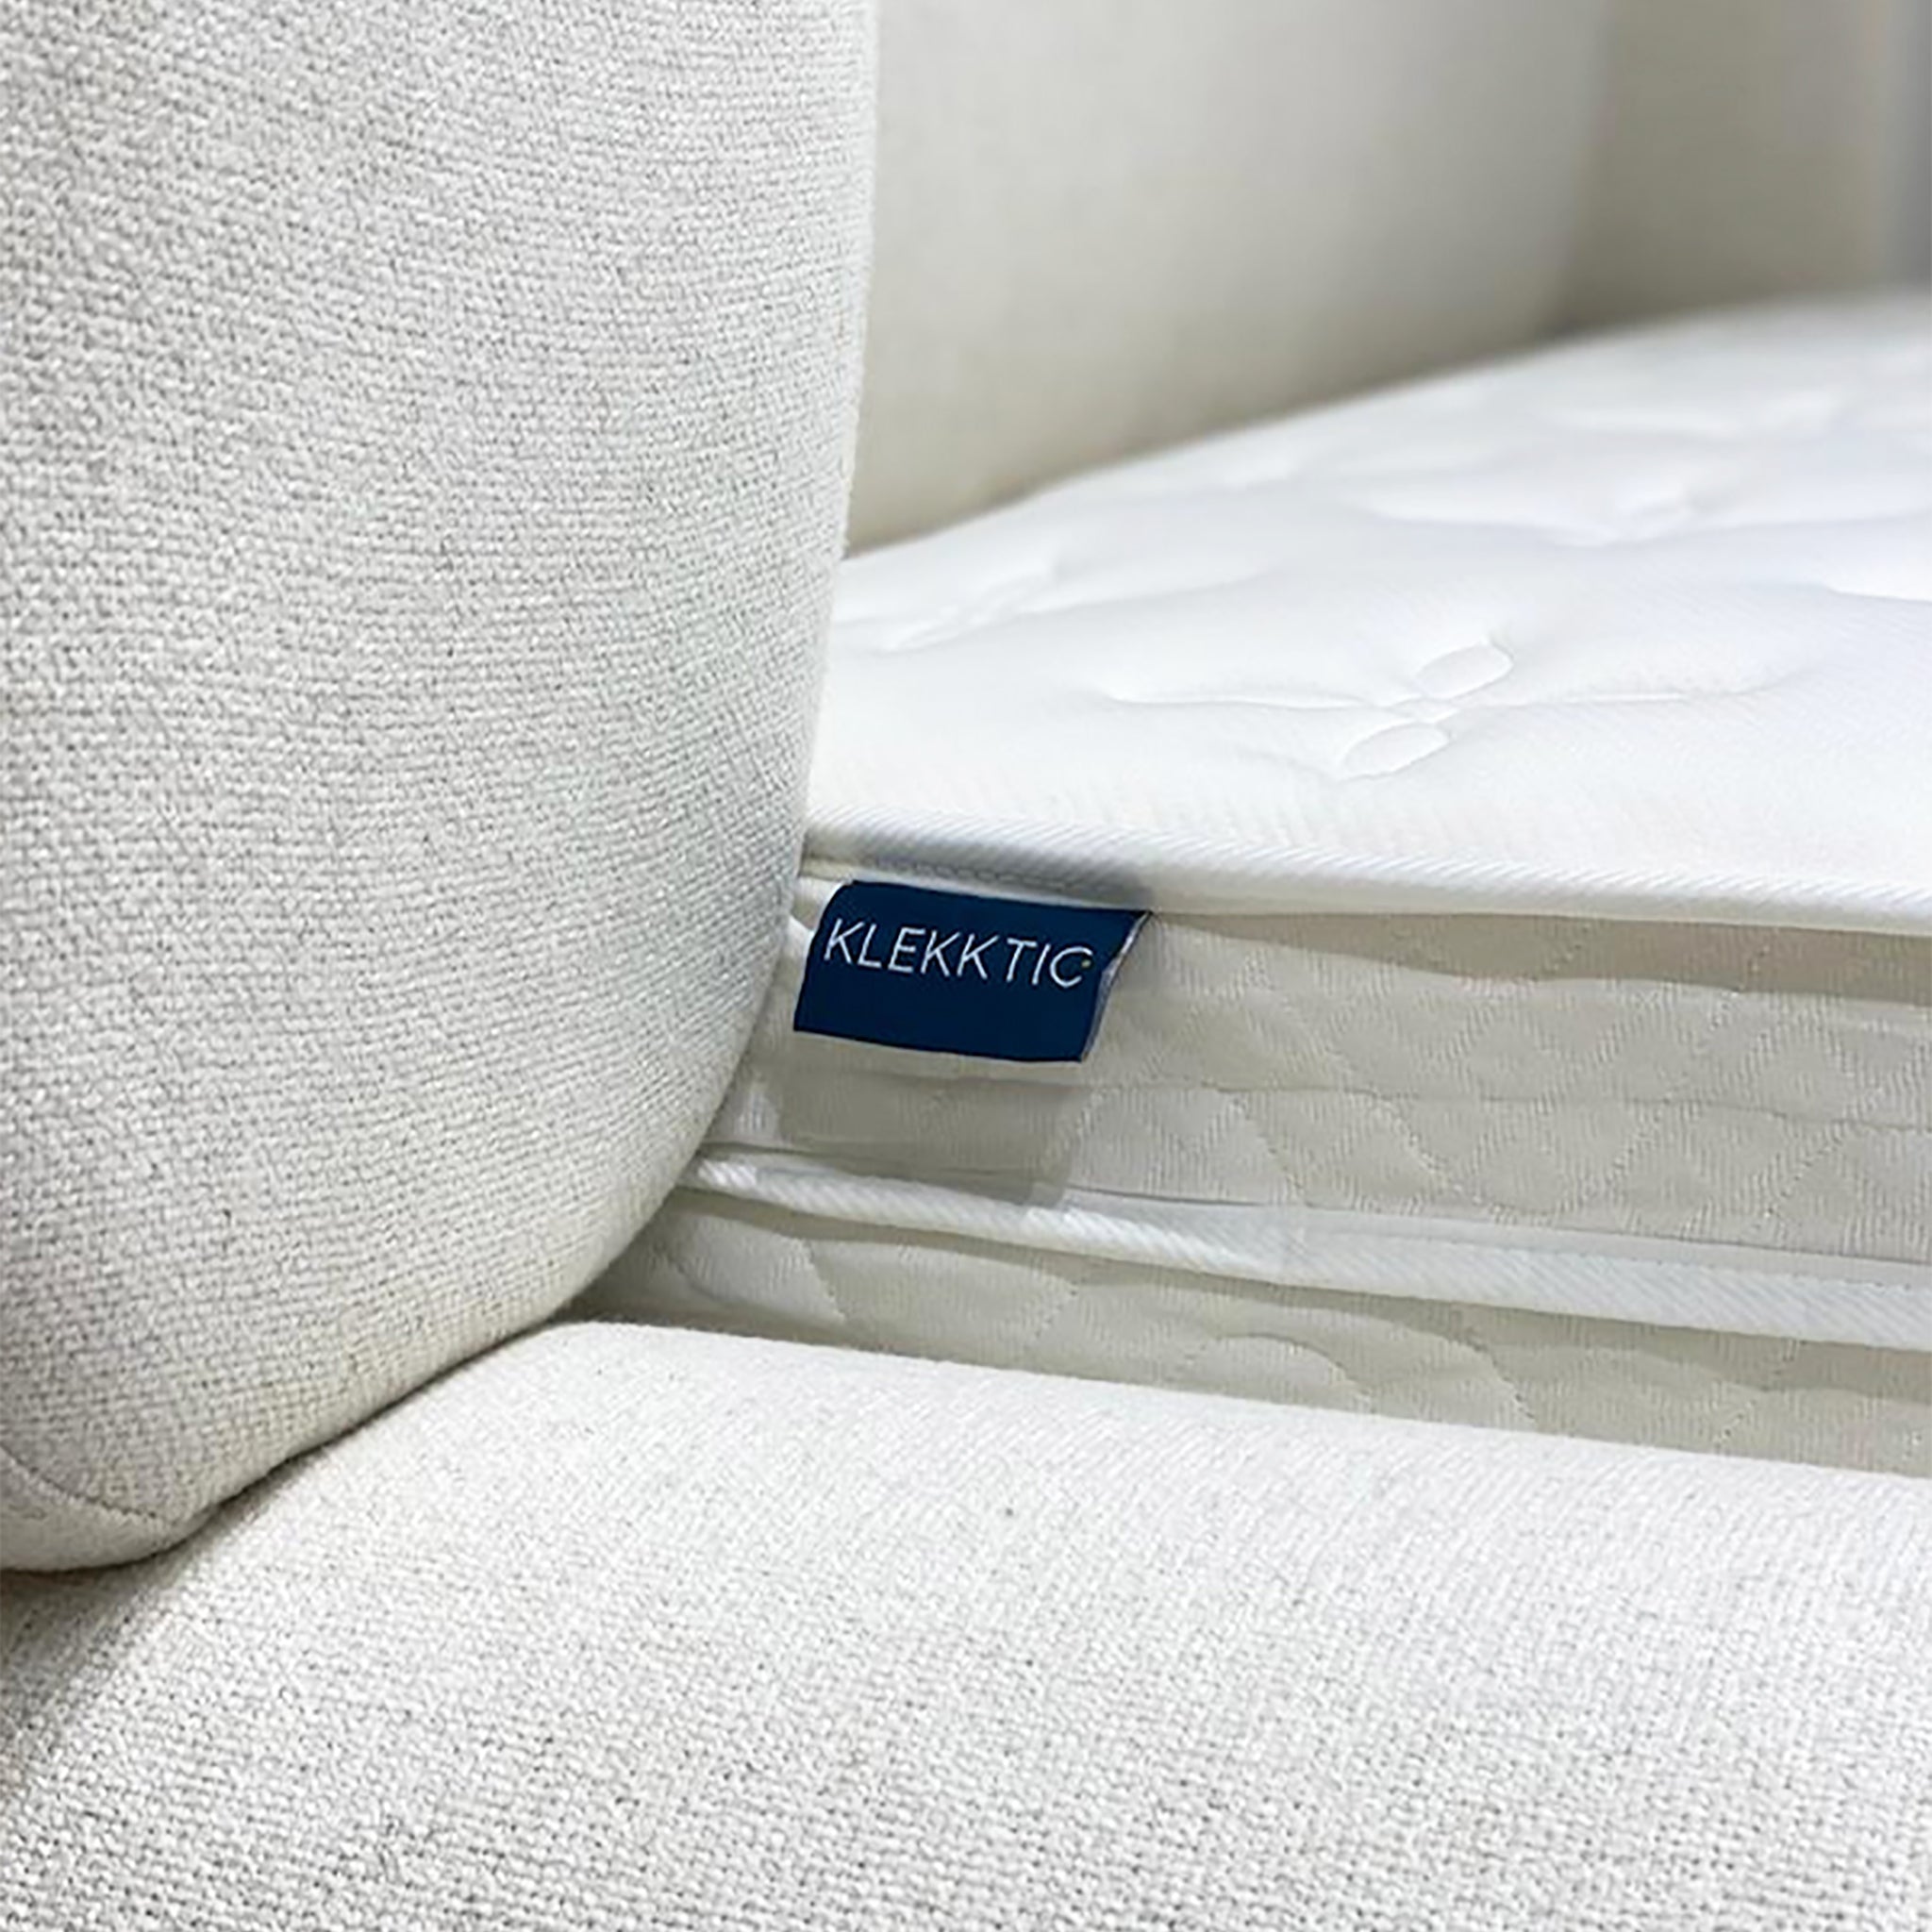 Plush white EuroTop mattress with a breathable knitted top sits beside a white couch. The Douglas EuroTop Mattress offers 30cm of comfort and supportive pocket springs.